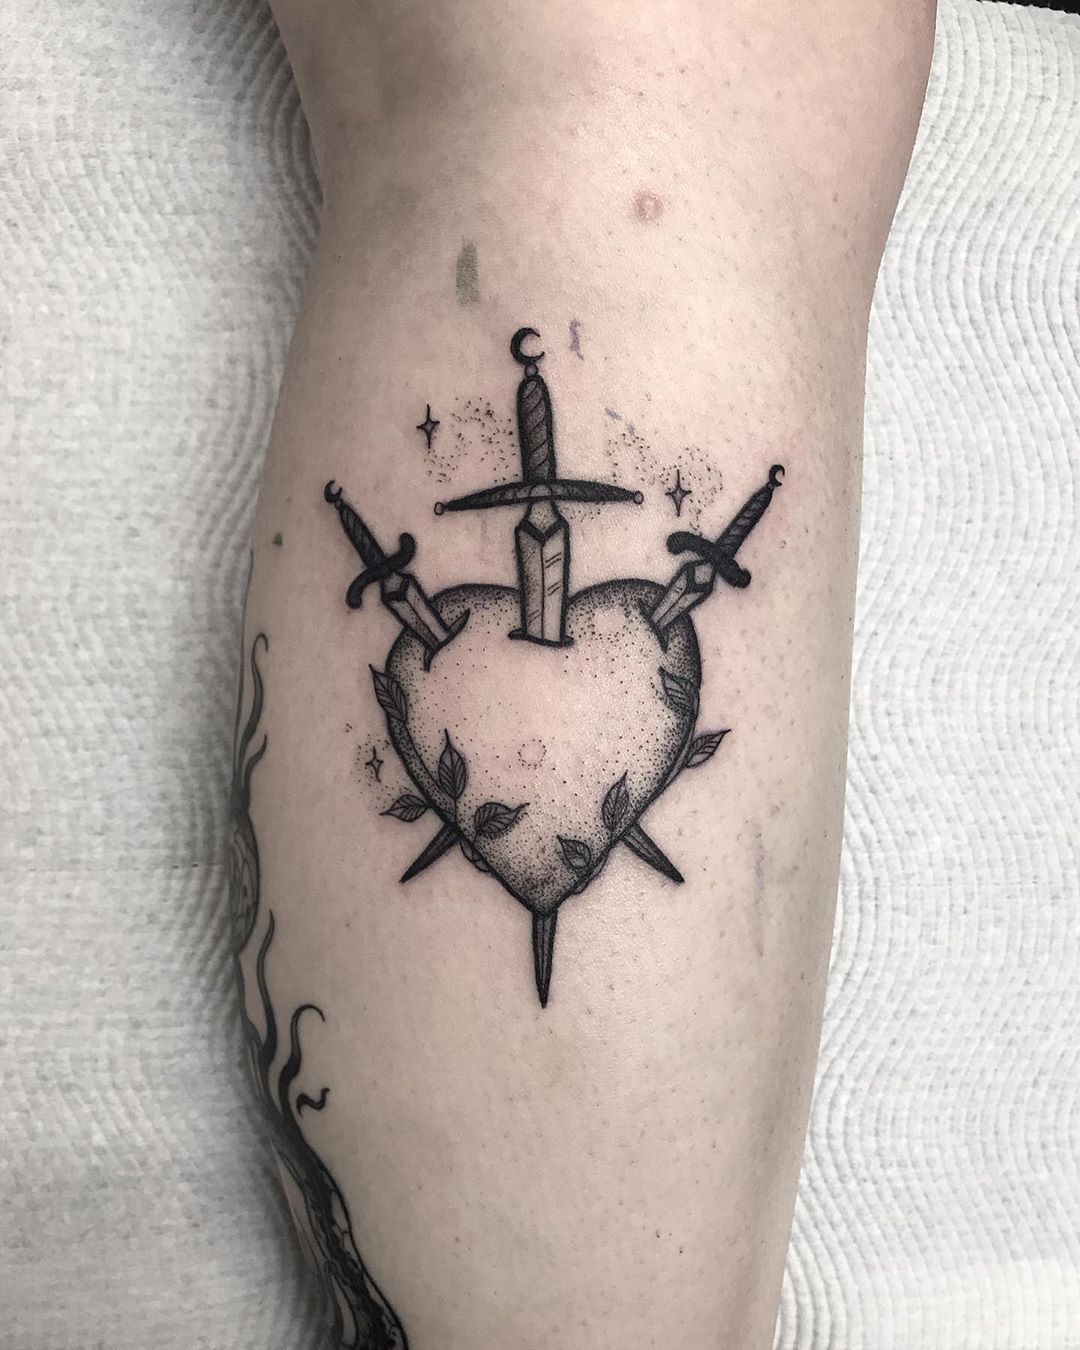 Three Swords Tattoo Meaning: A Symbol of Strength, Courage, and Honor